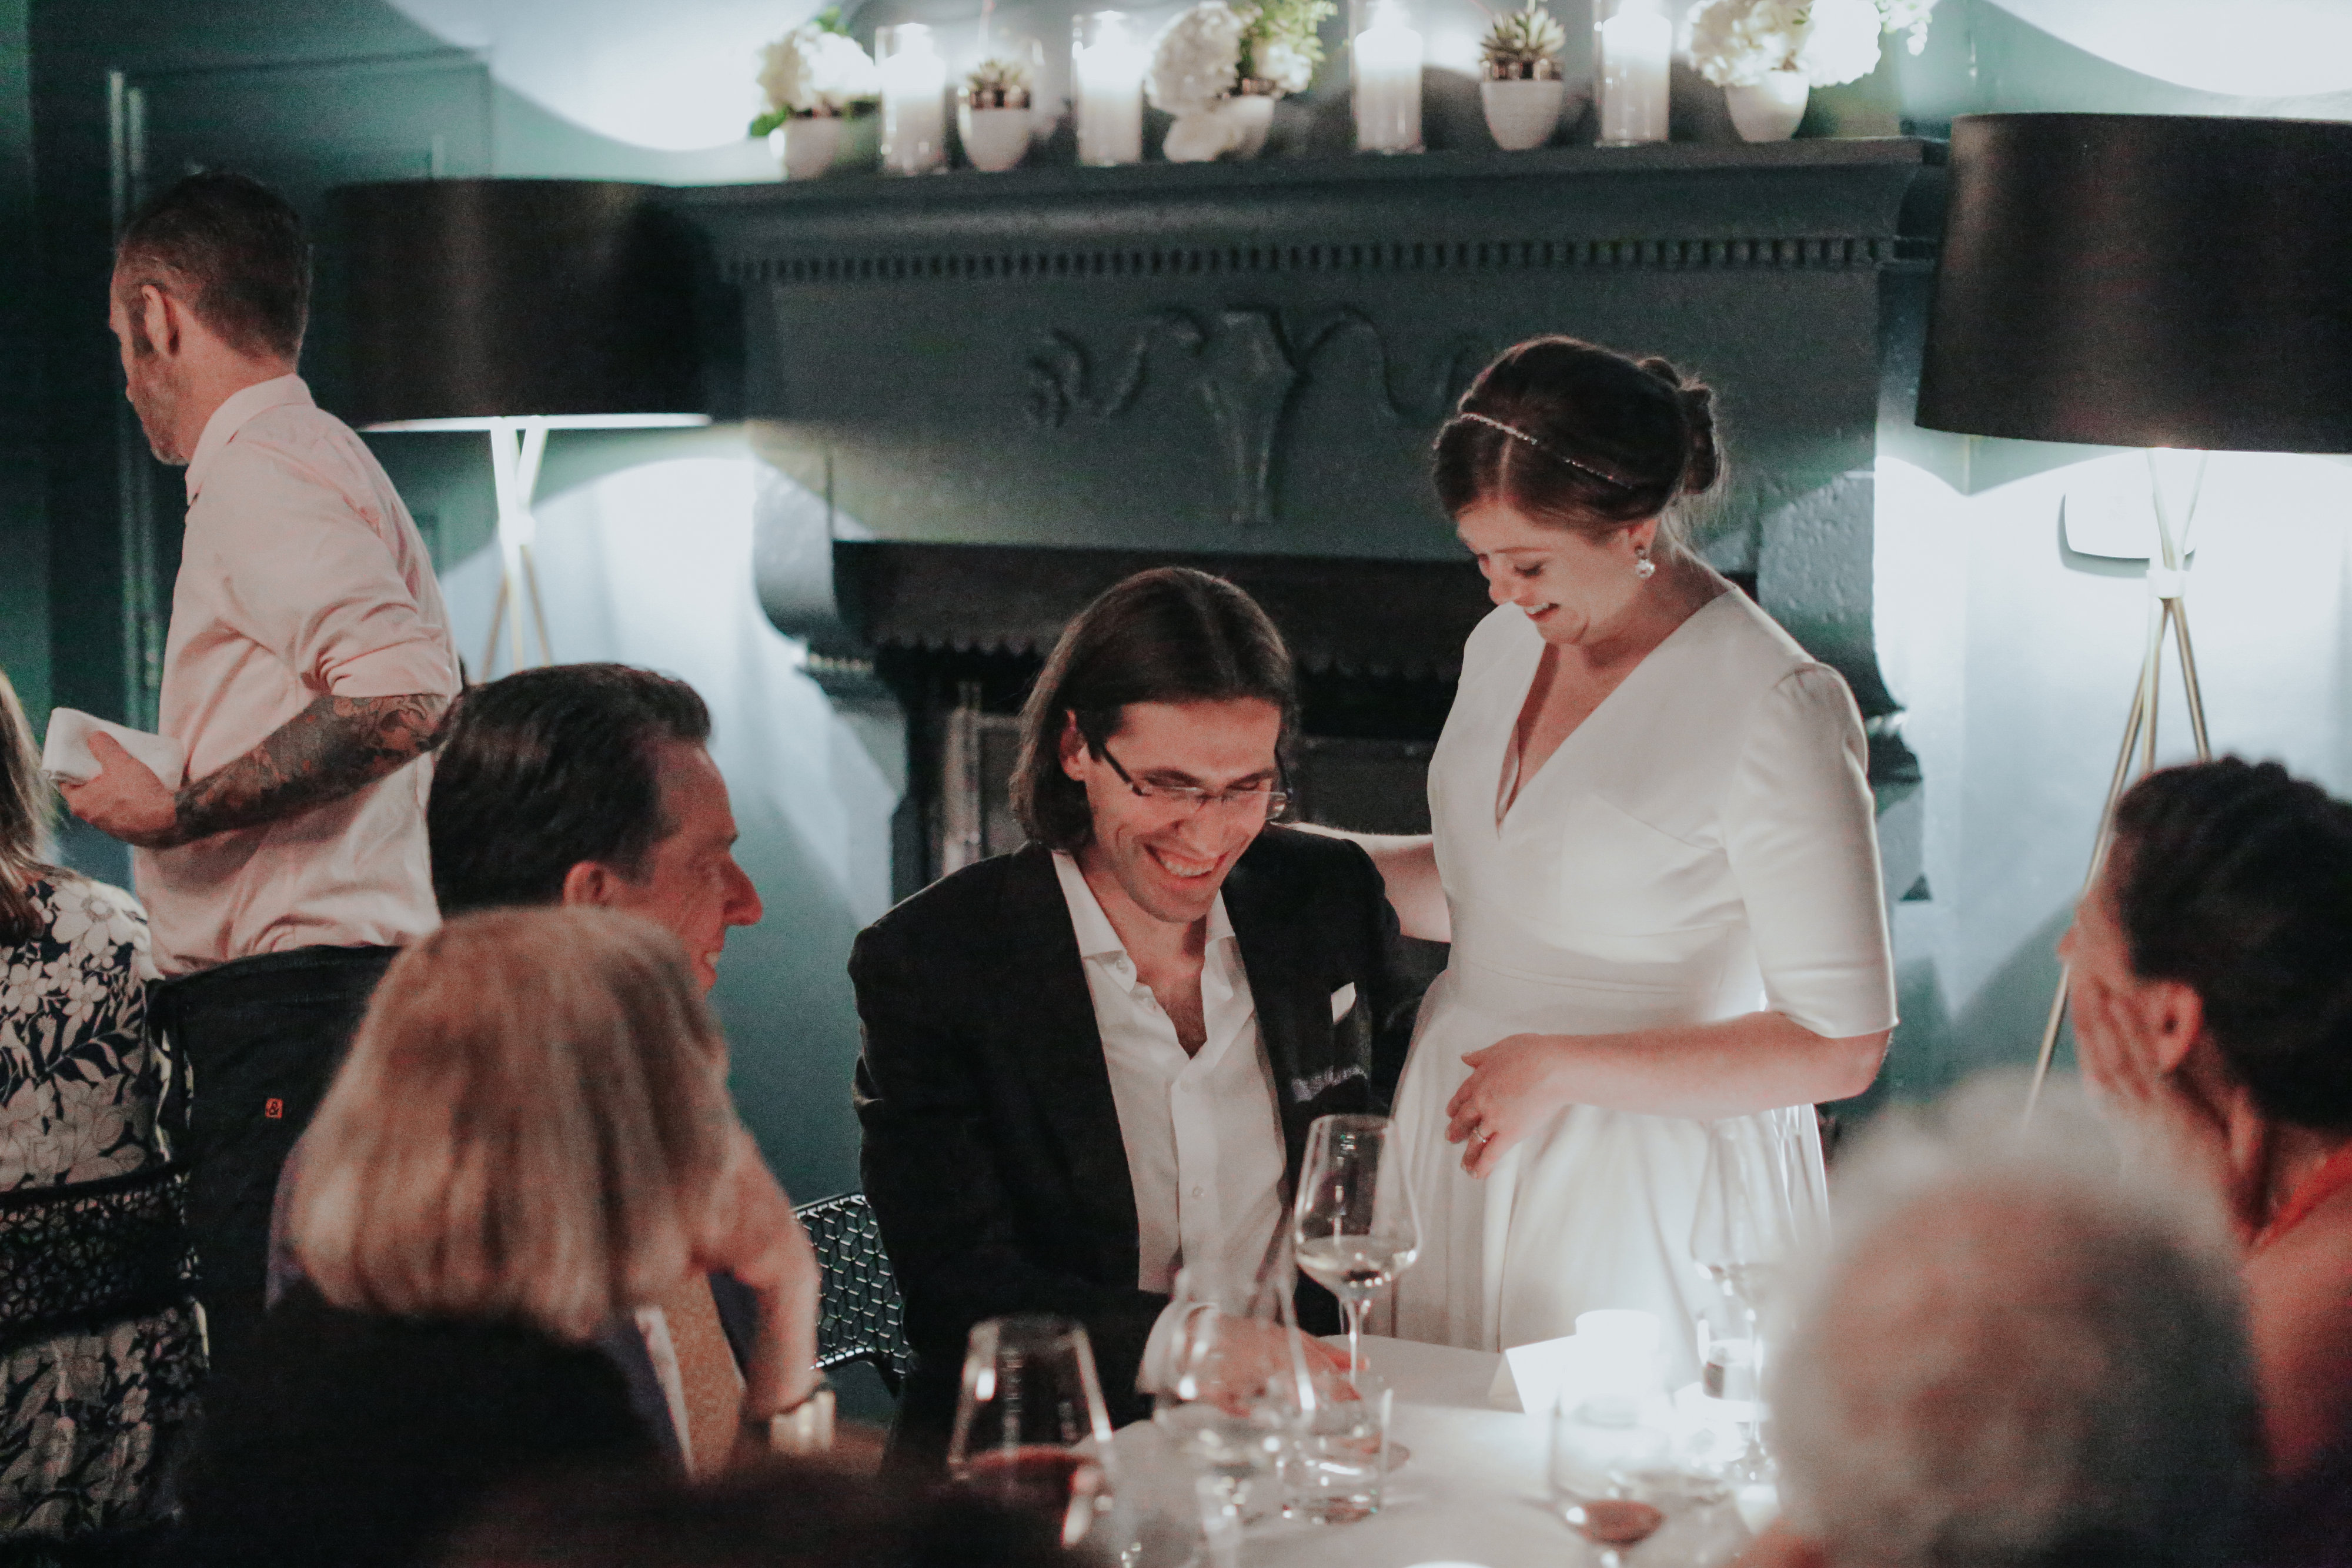 A bride and groom laughing together at a private discussion held among friends at a dinner table